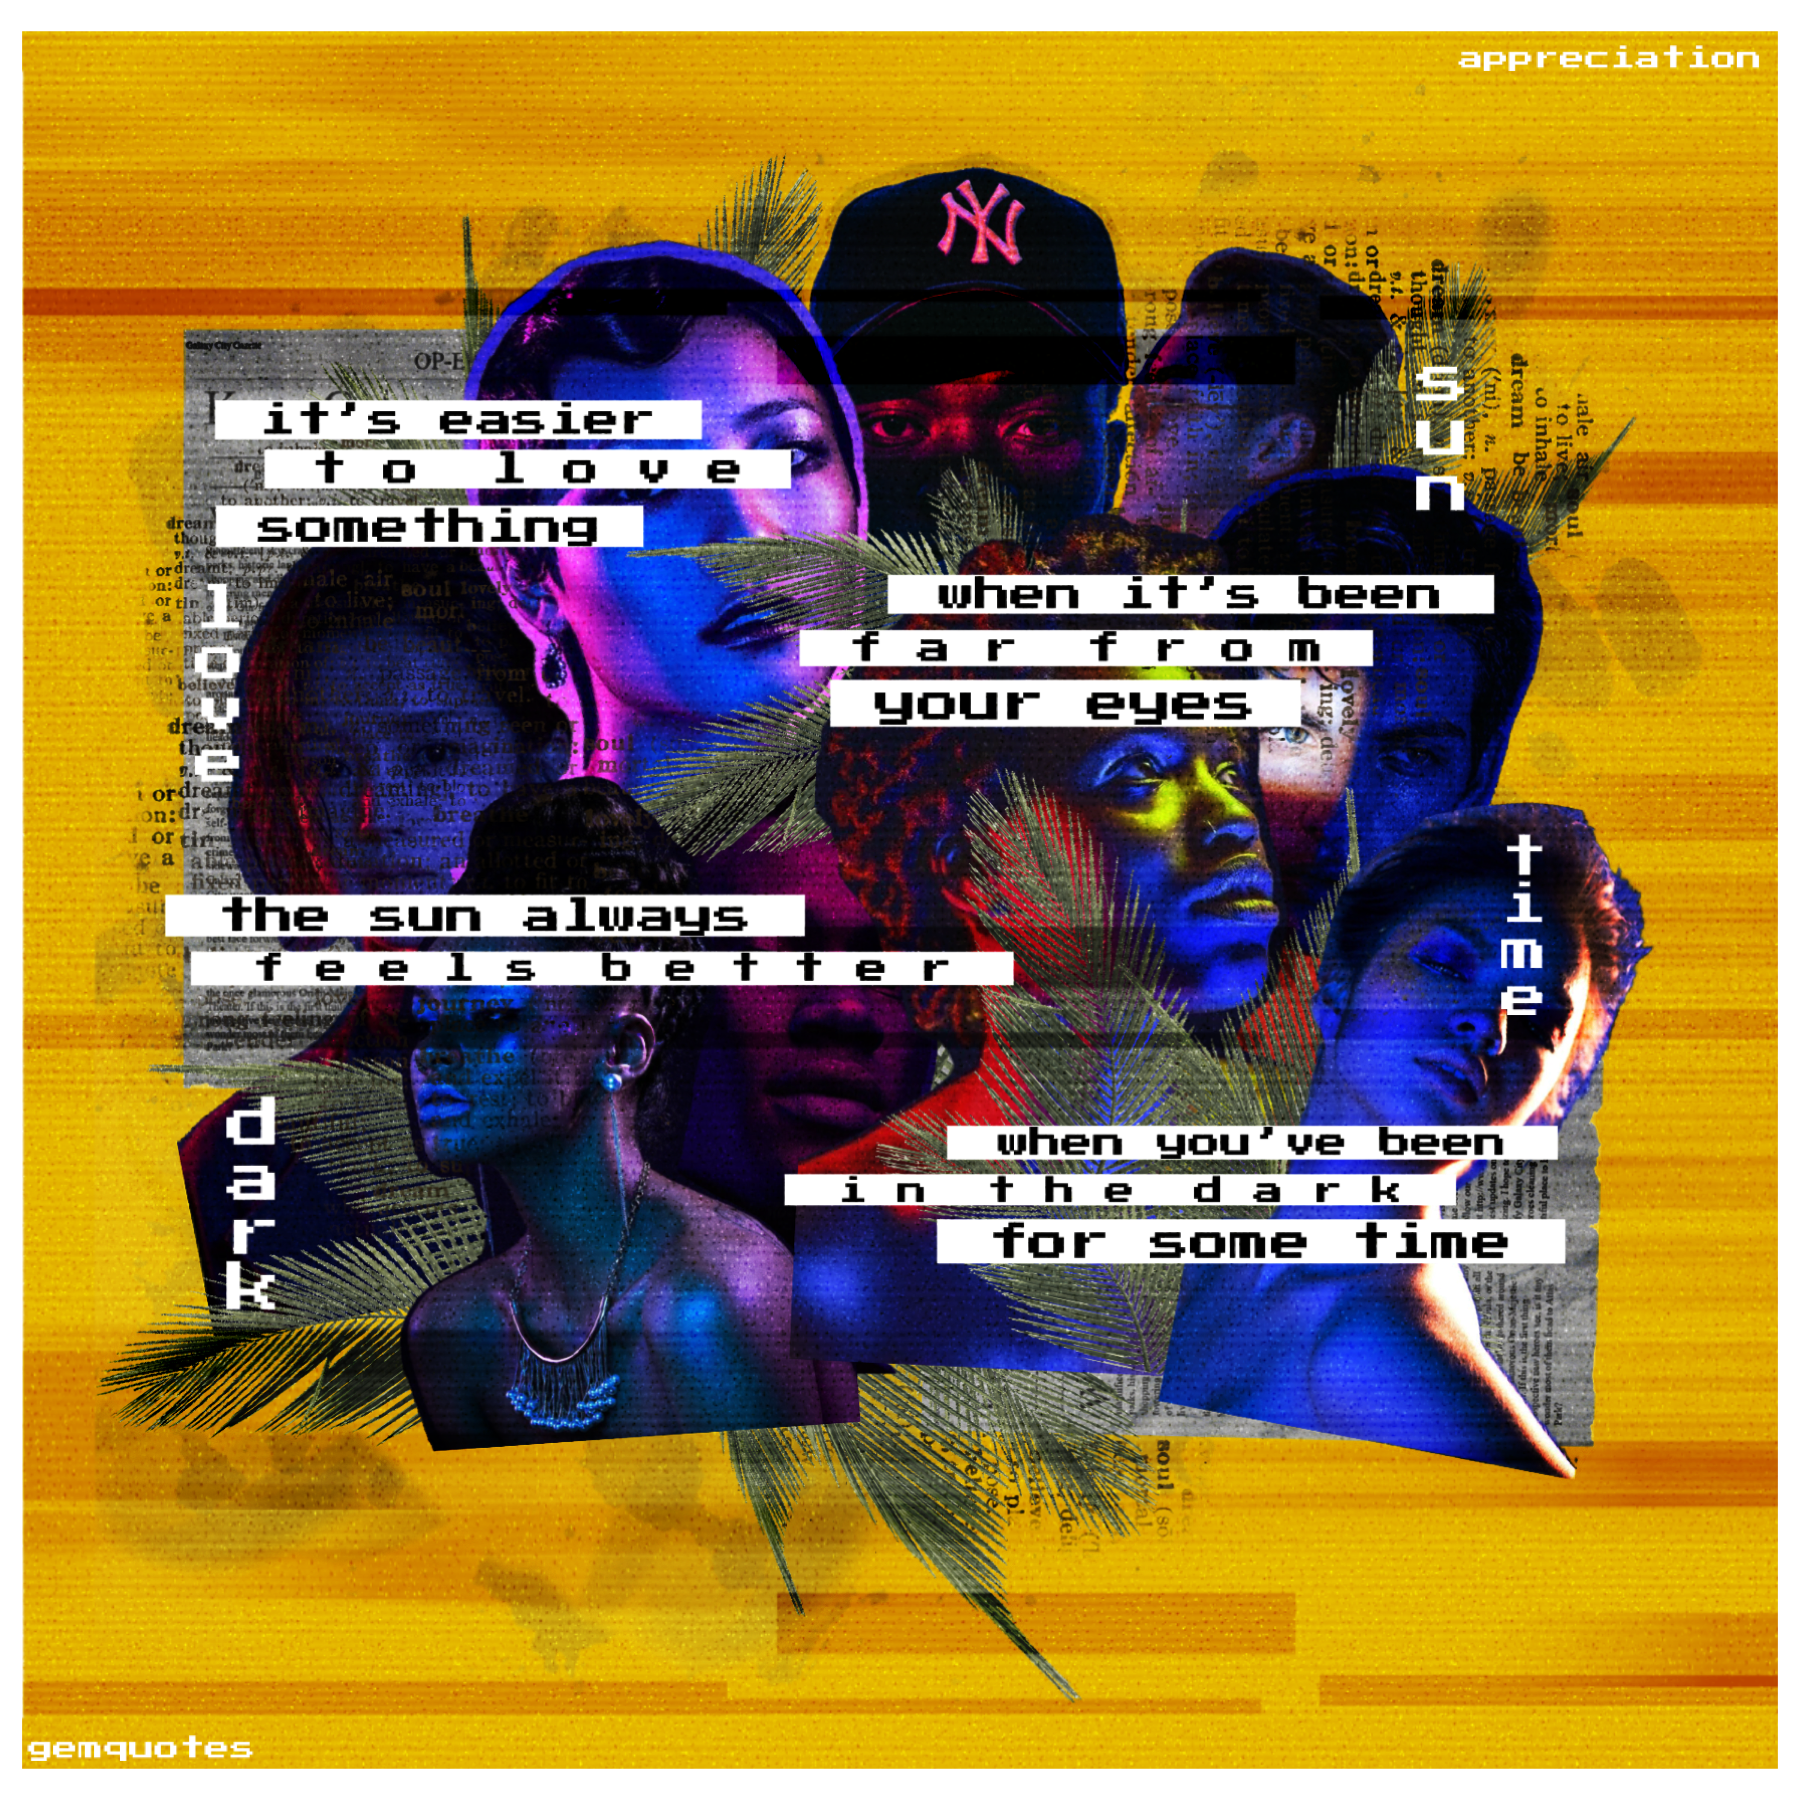 “💥t̸a̸p̸💥”
Poem by me :) Glitch effect collage for u all, I thought it’d be a cool concept to try out. I am sTrESsEd rn but hopefully by next week I’ll be back to calm😌 Currently reading Kings Rising and sending love~~😘😘